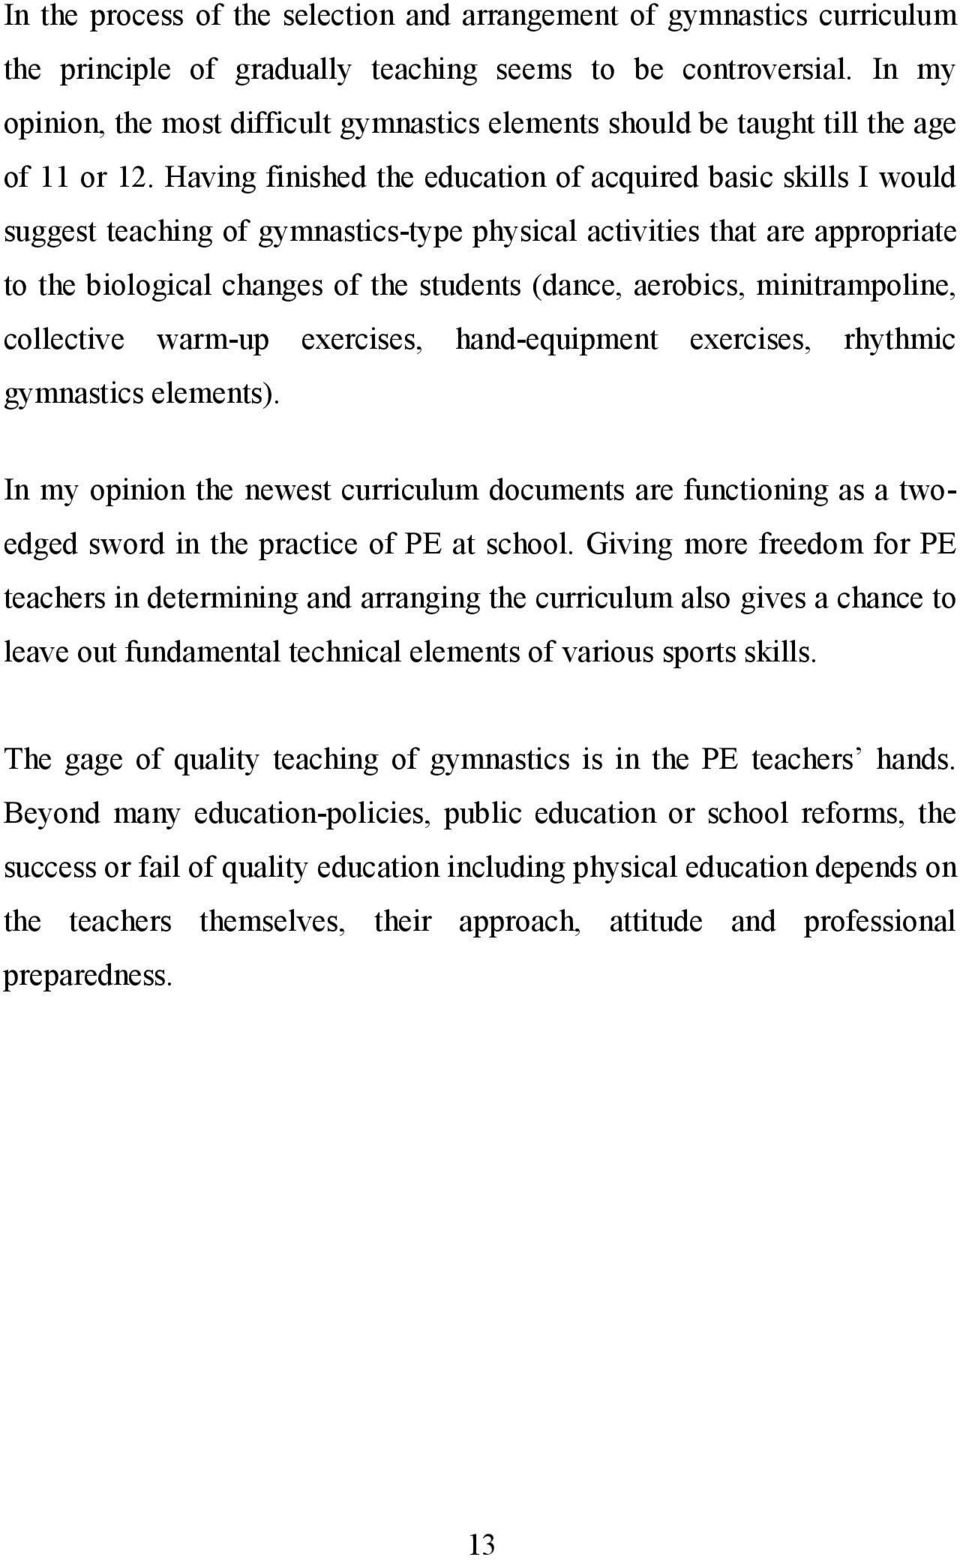 Having finished the education of acquired basic skills I would suggest teaching of gymnastics-type physical activities that are appropriate to the biological changes of the students (dance, aerobics,